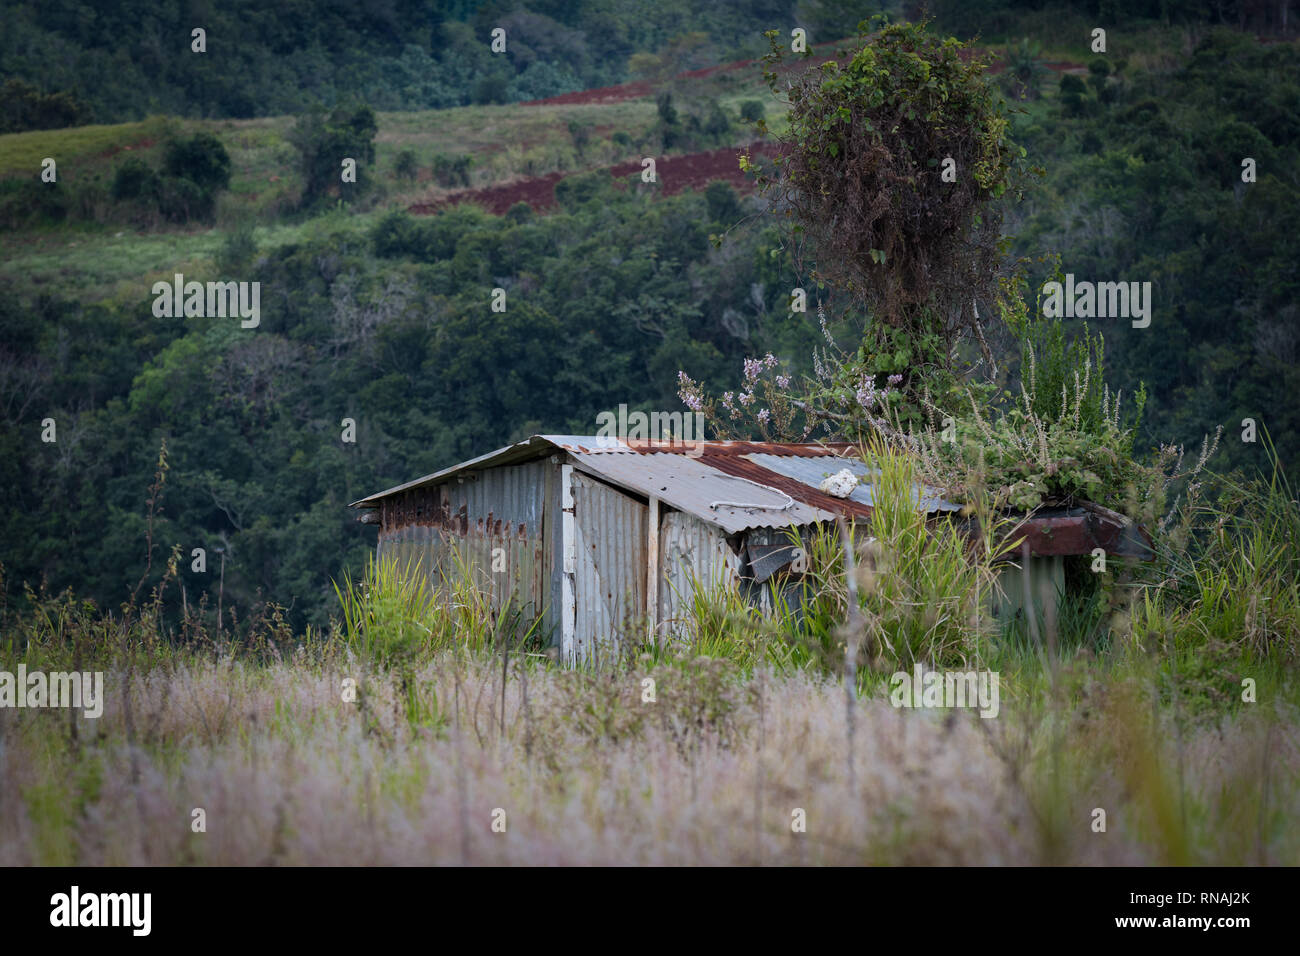 Old abandoned home in rural Jamaica made of zinc, rusting away in countryside grassland. Stock Photo